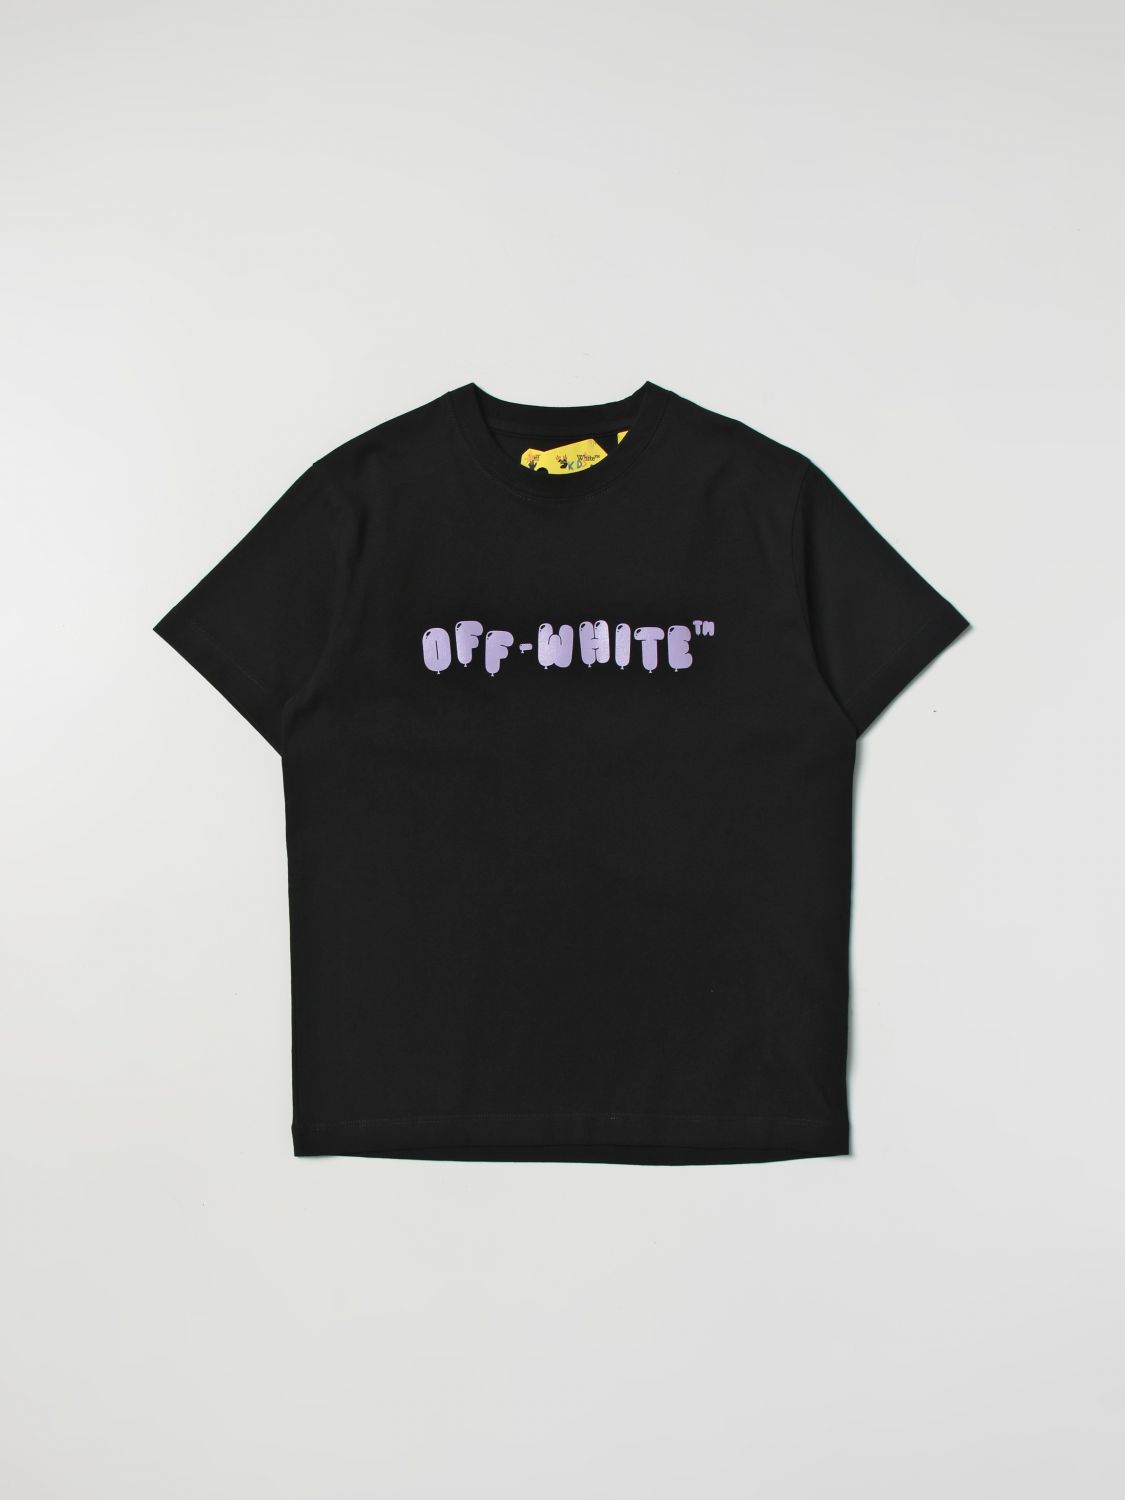 OFF-WHITE black cotton T-Shirt – To Be Outlet